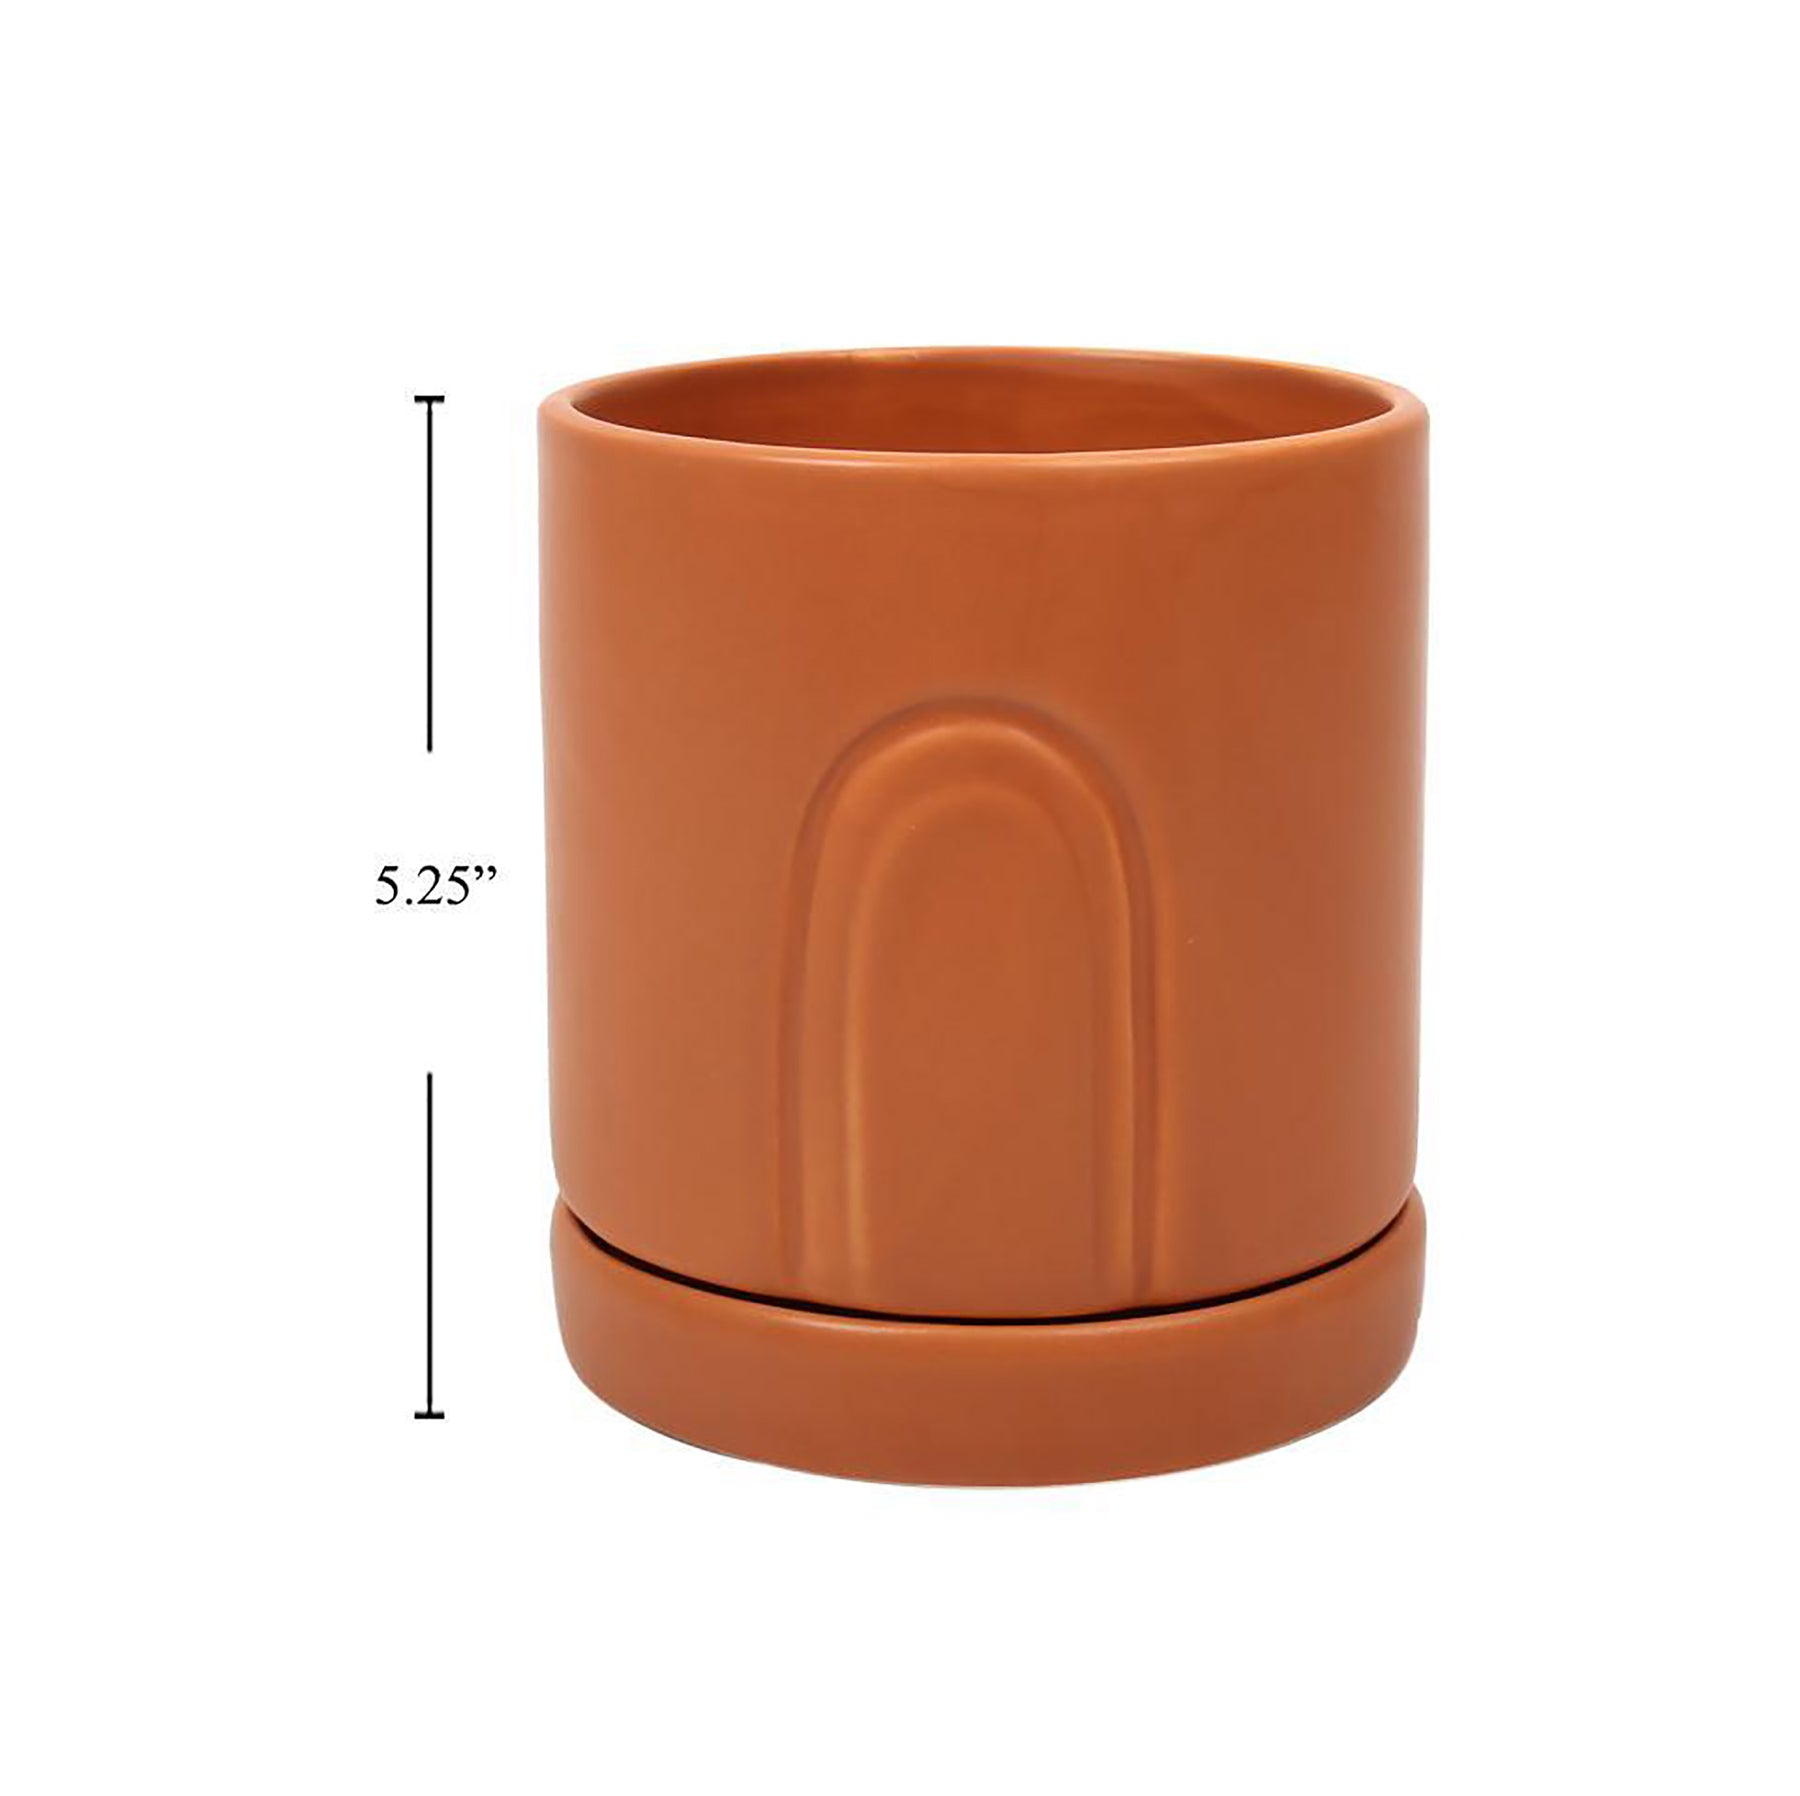 Laken Ceramic Planter with Saucer 4.8 D x 5.25 H in